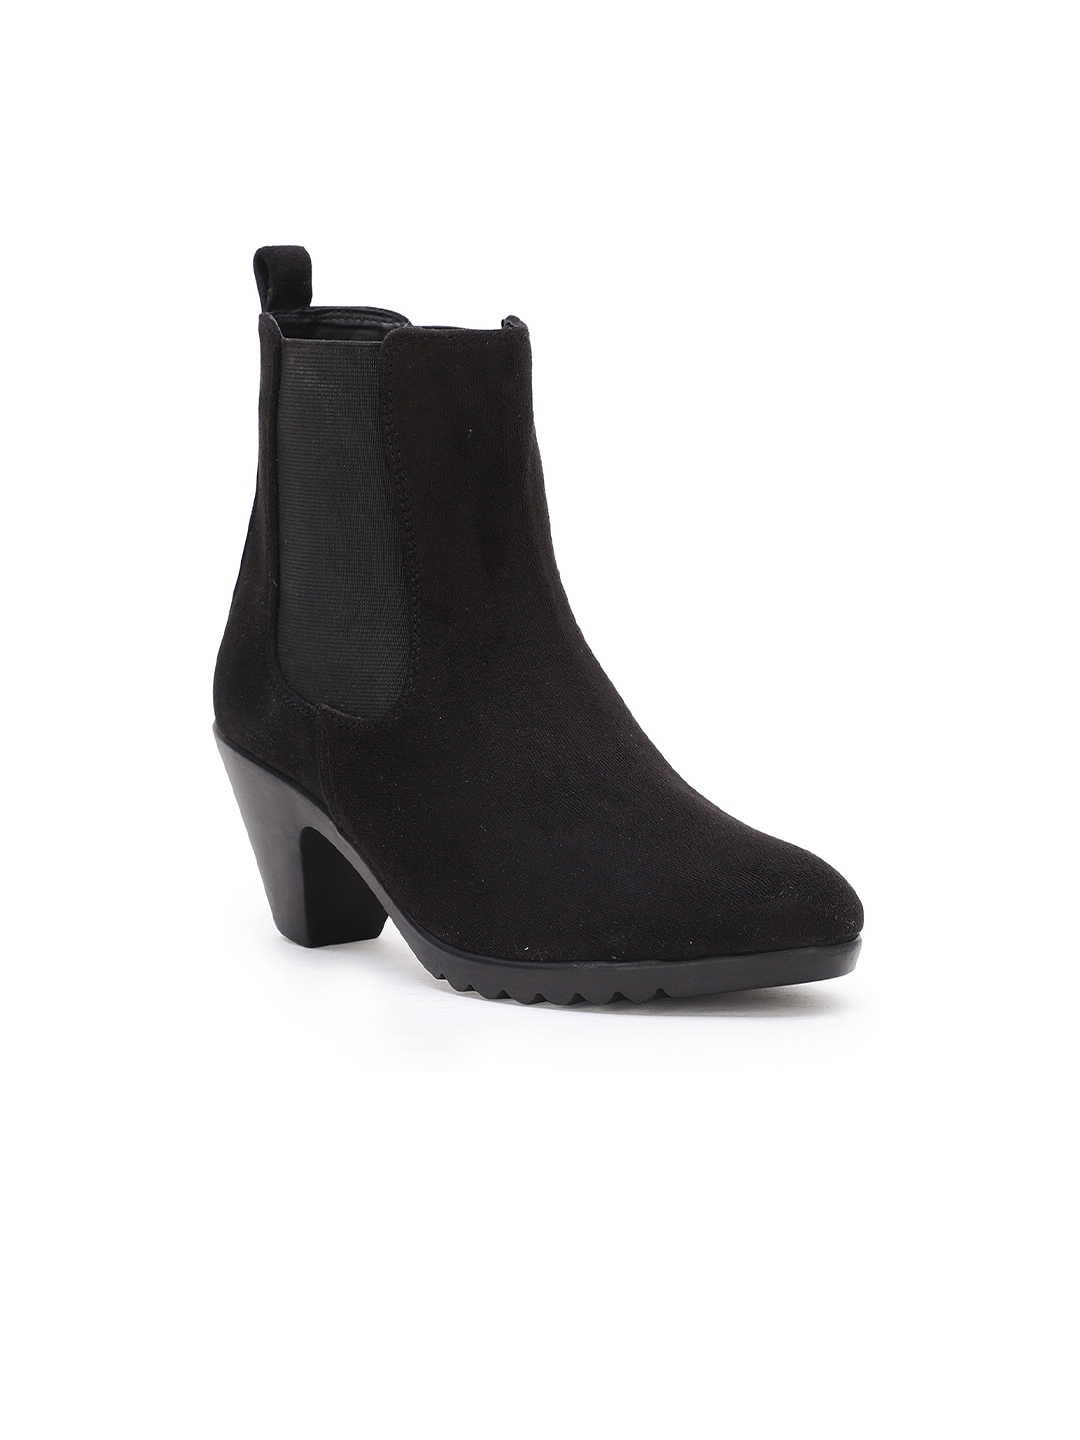 Bruno Manetti Women Black Solid Suede Heeled Boots Price in India